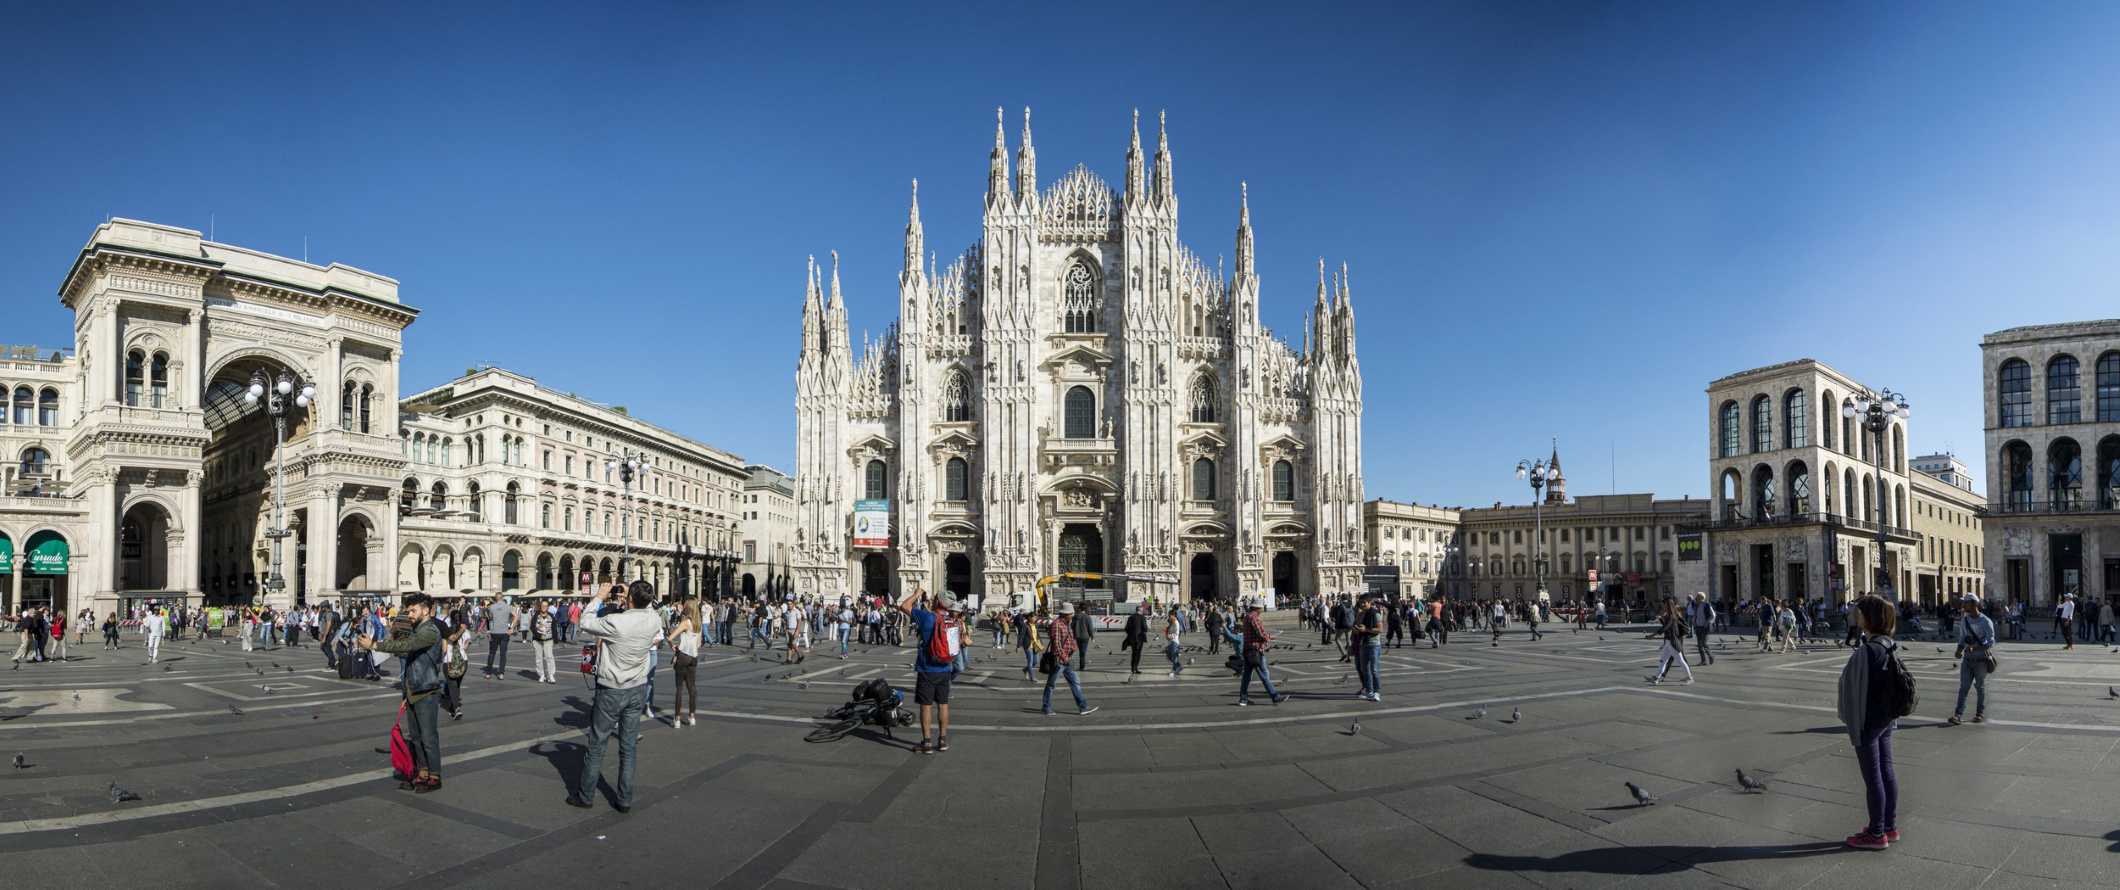 Panoramic view of Milan's cathedral and plaza in front with people standing around taking photos.